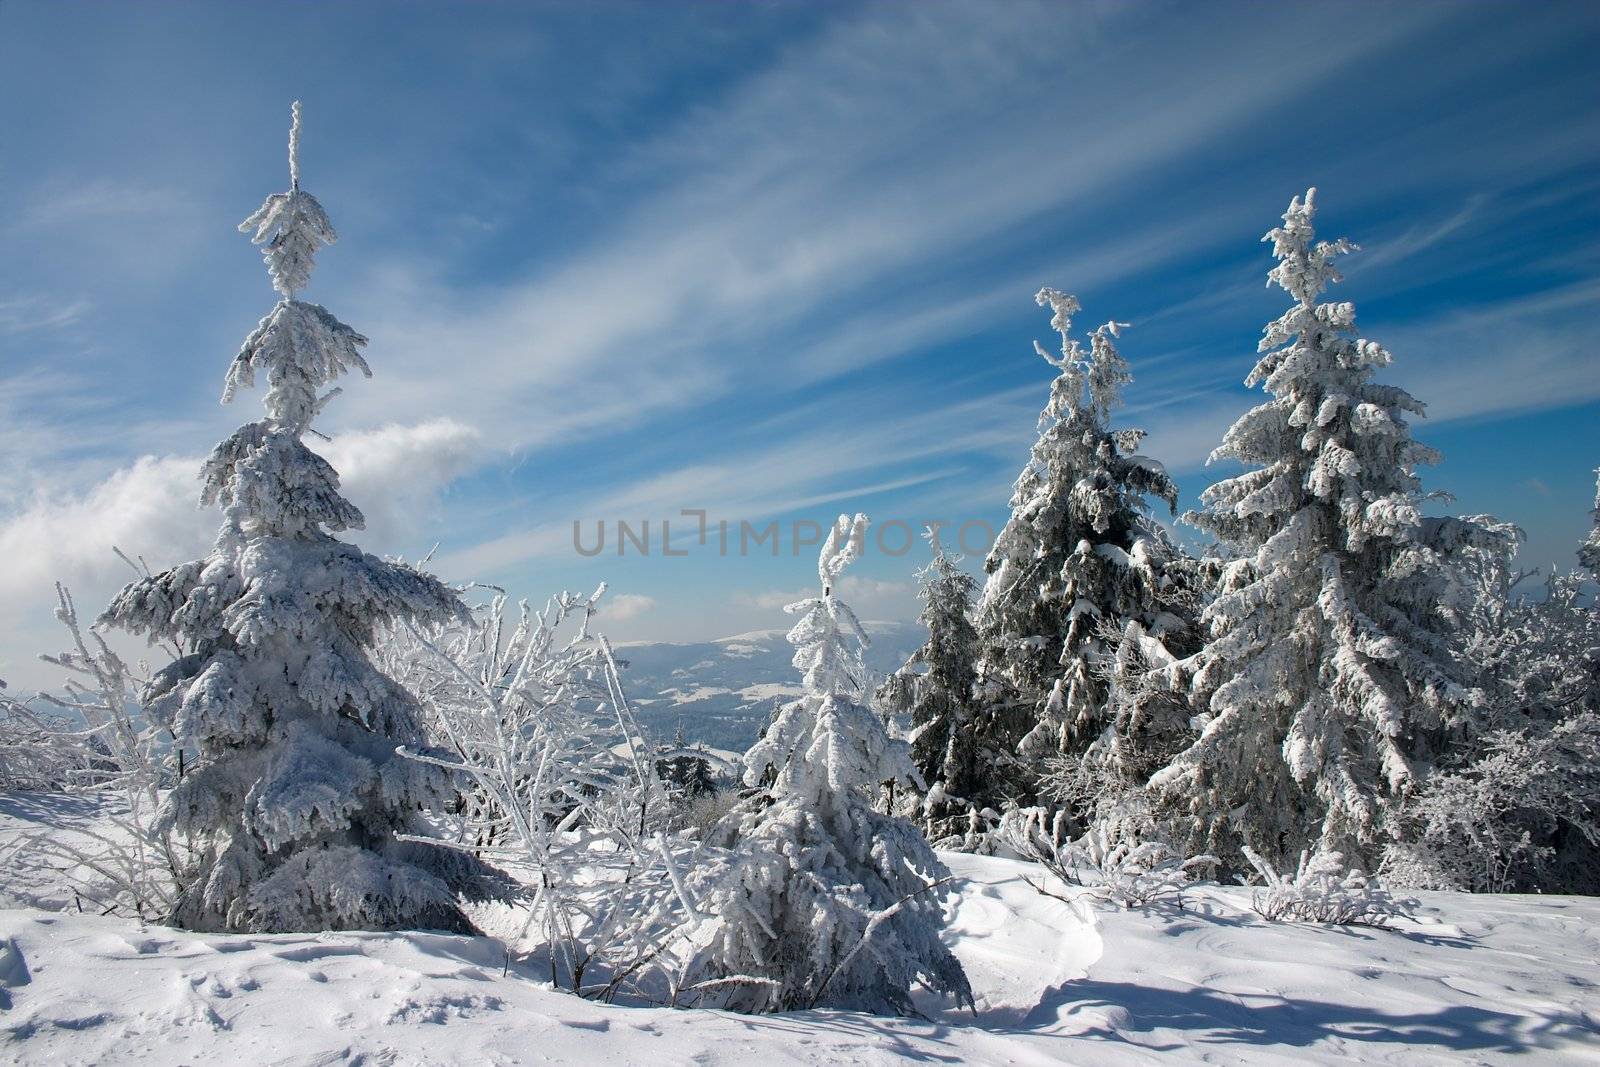 snow covered tree in mountains under blue sky with clouds by Ukrainian